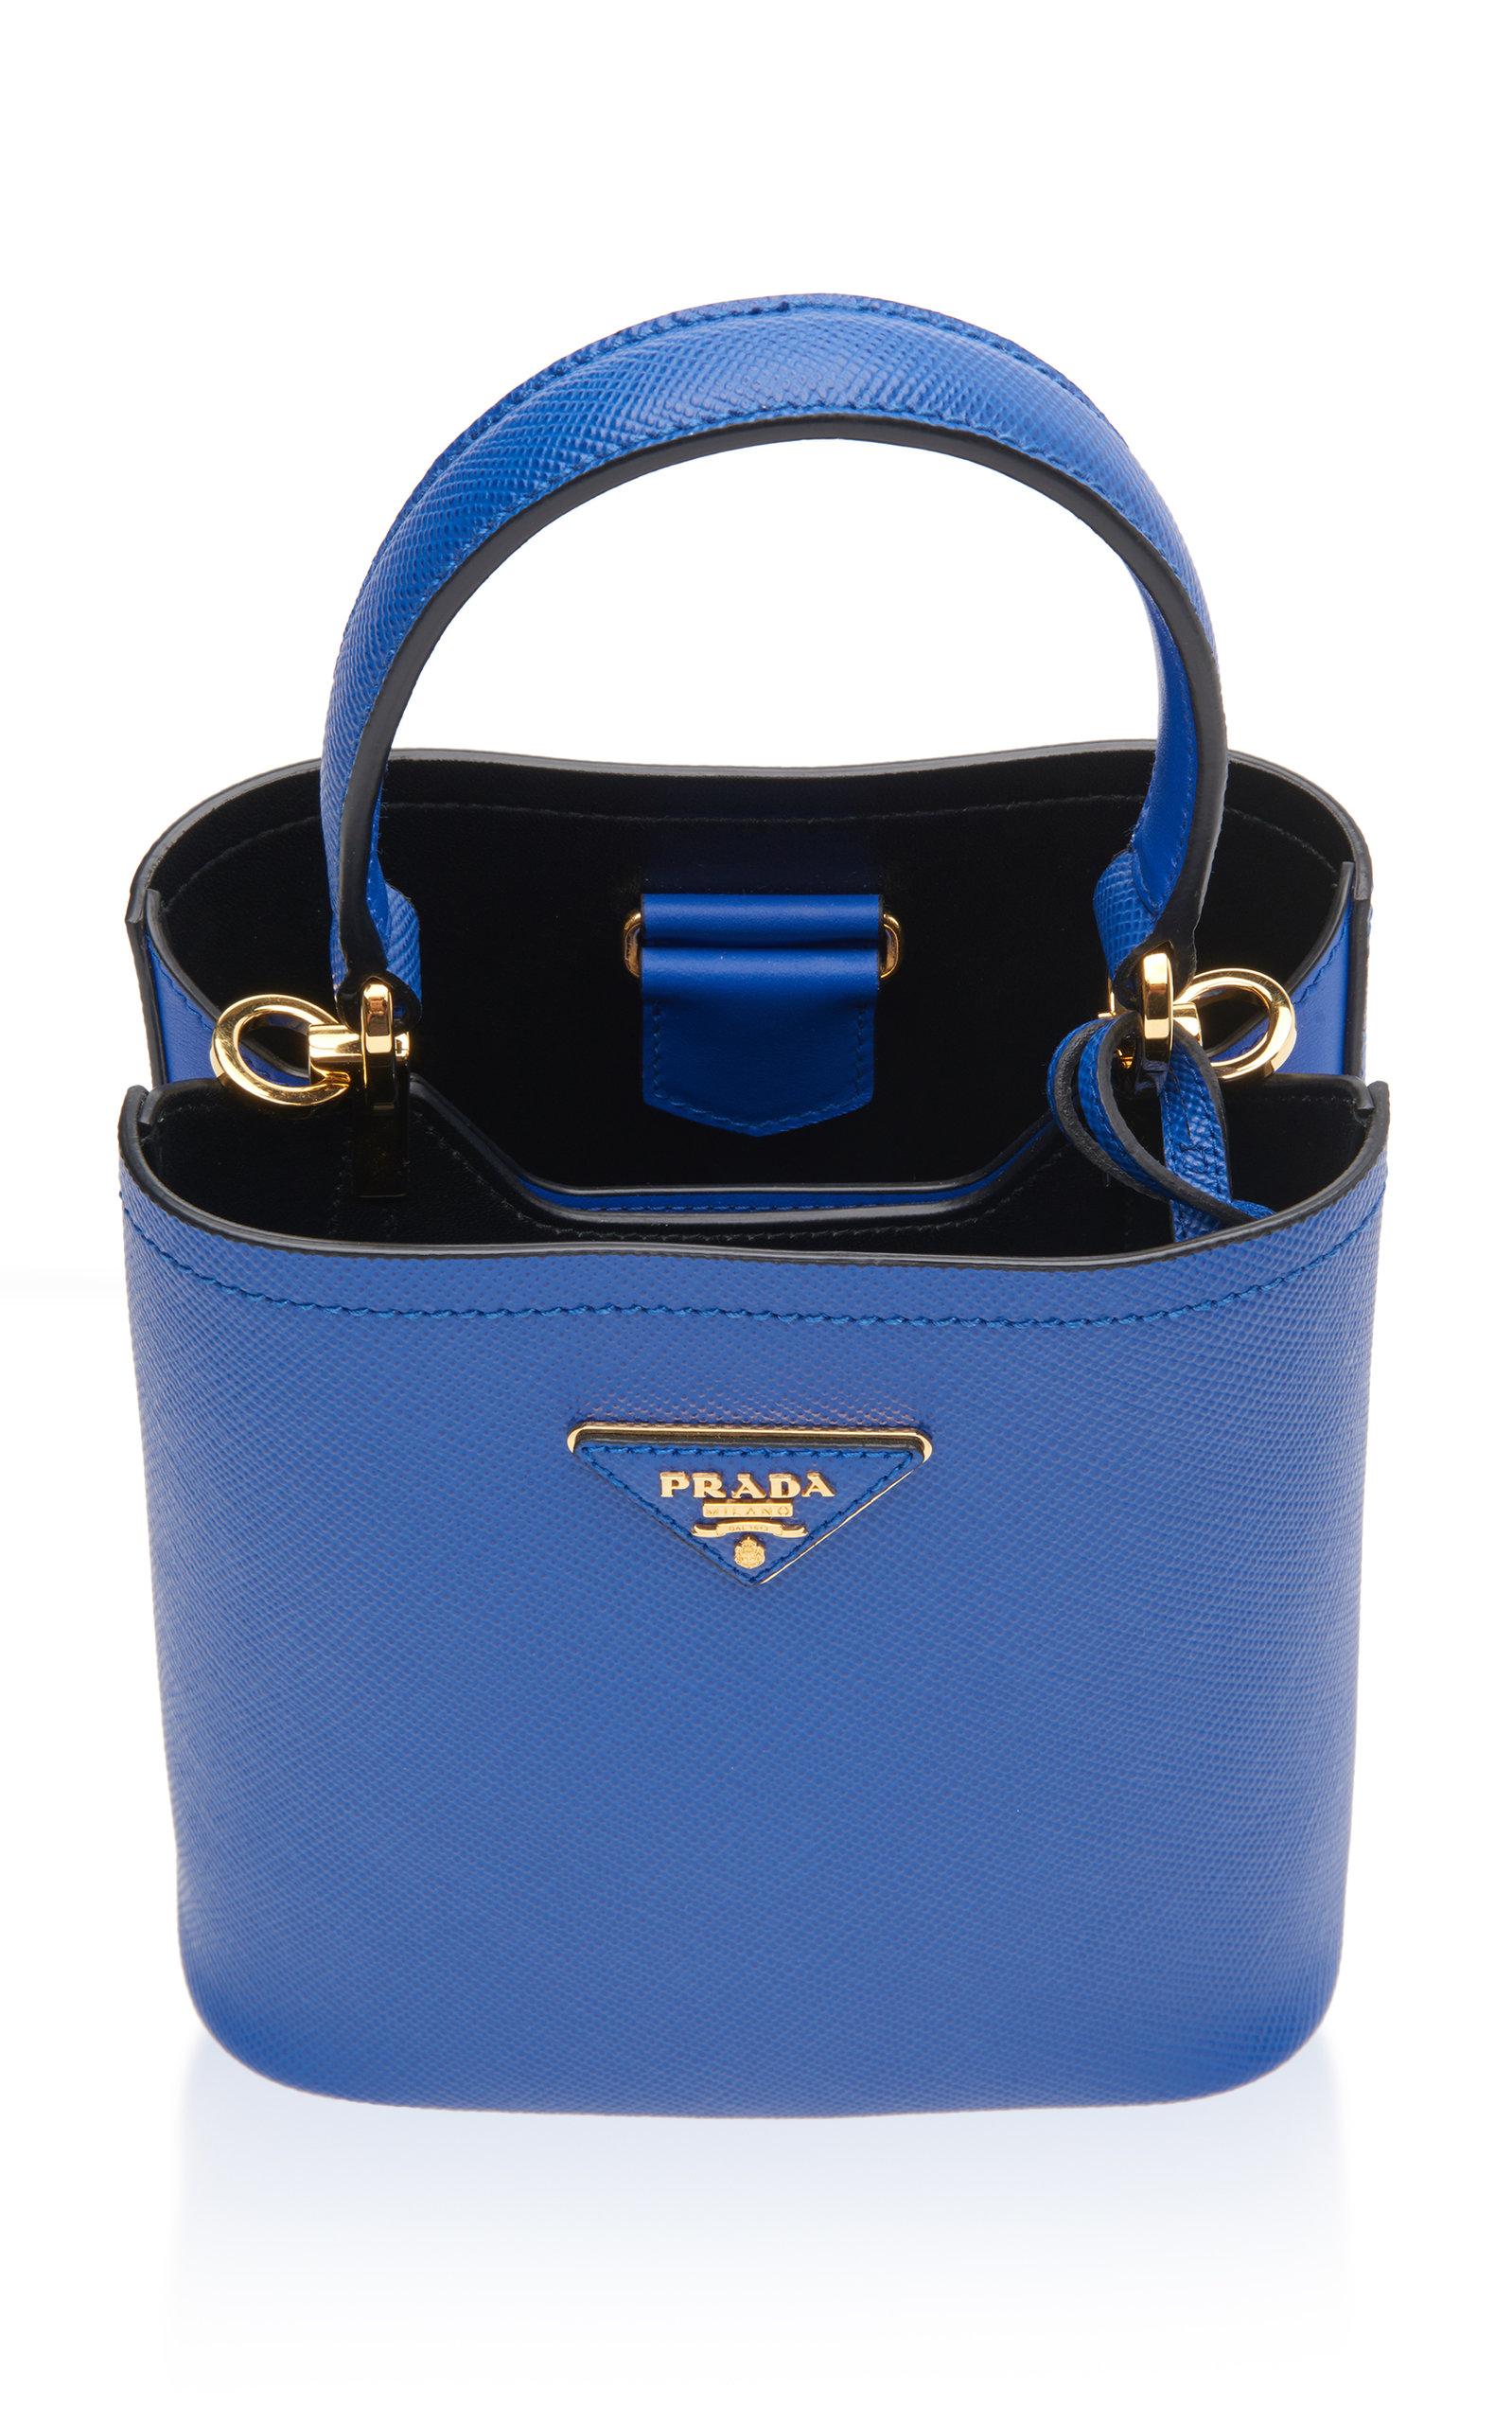 Prada Small Saffiano Leather Double Bucket Bag in Blue - Lyst